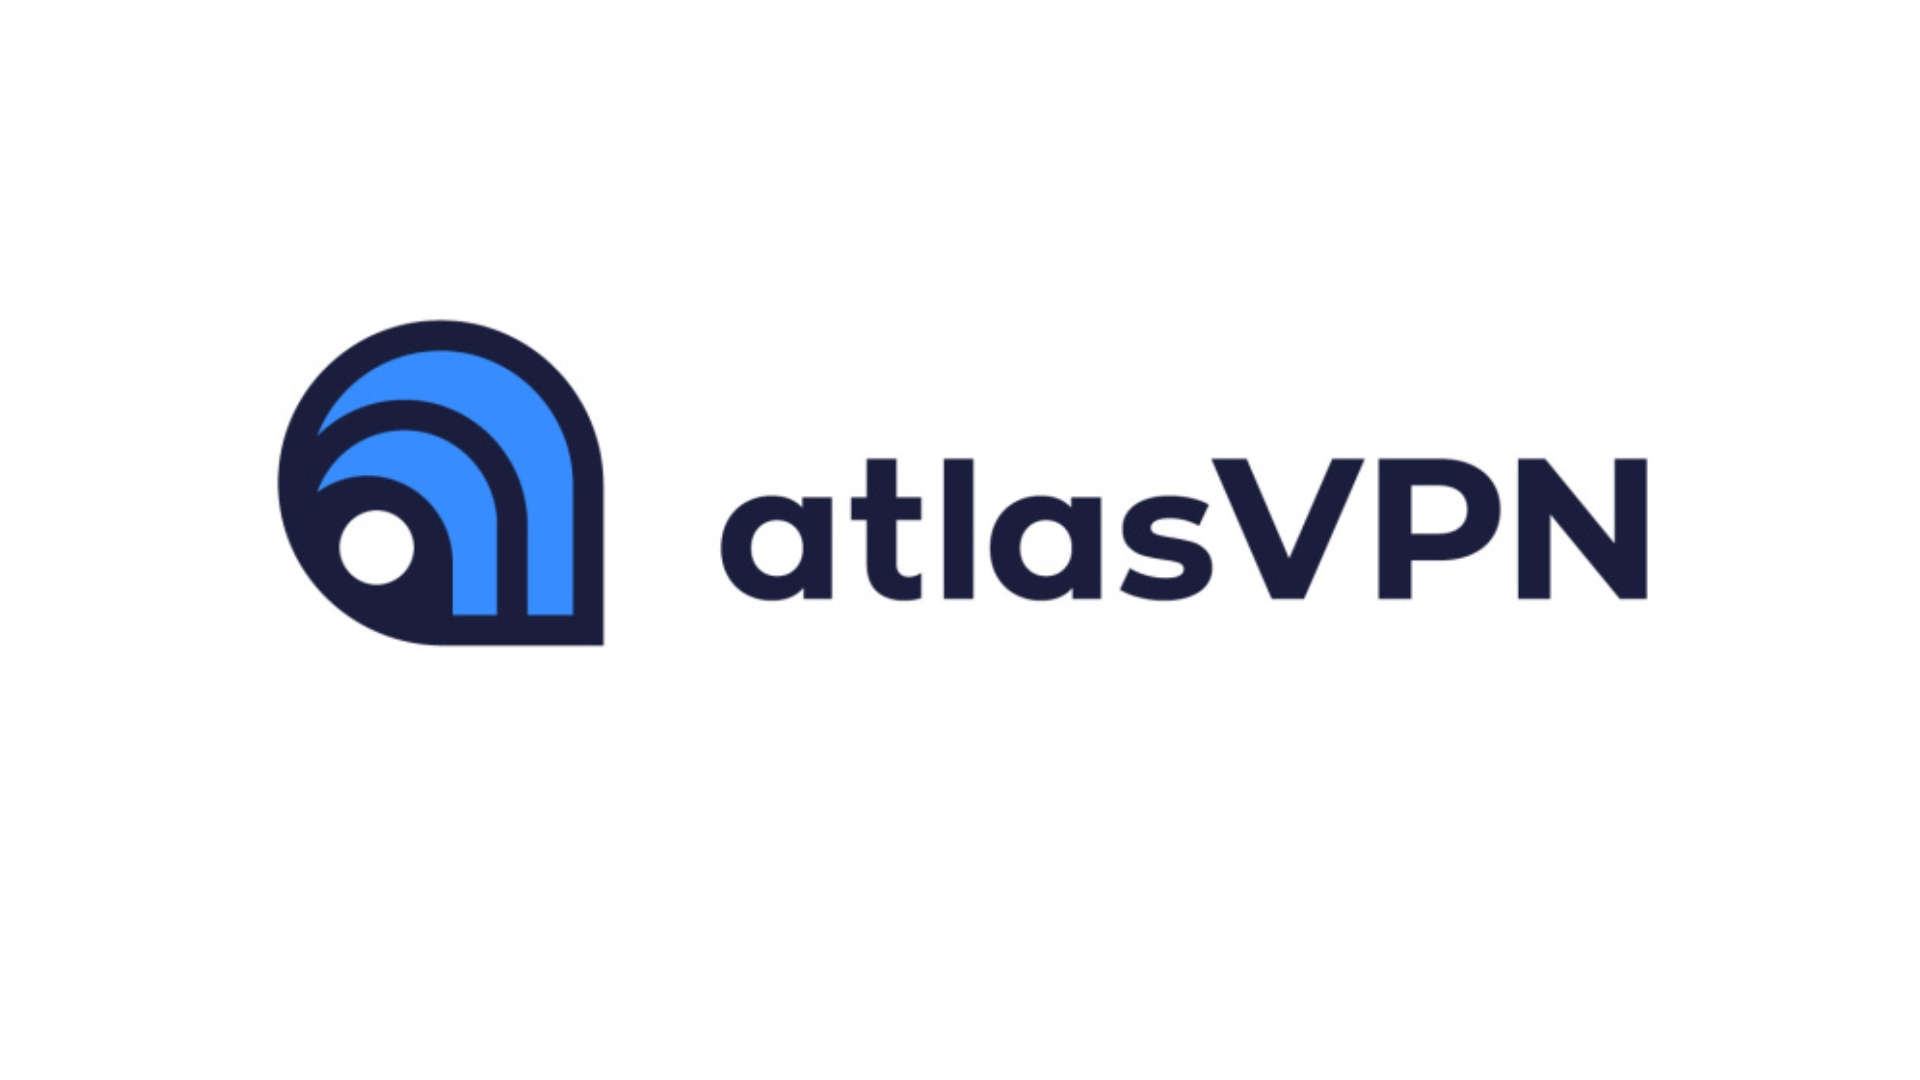 VPN costs for AtlasVPN. Image shows the company logo.